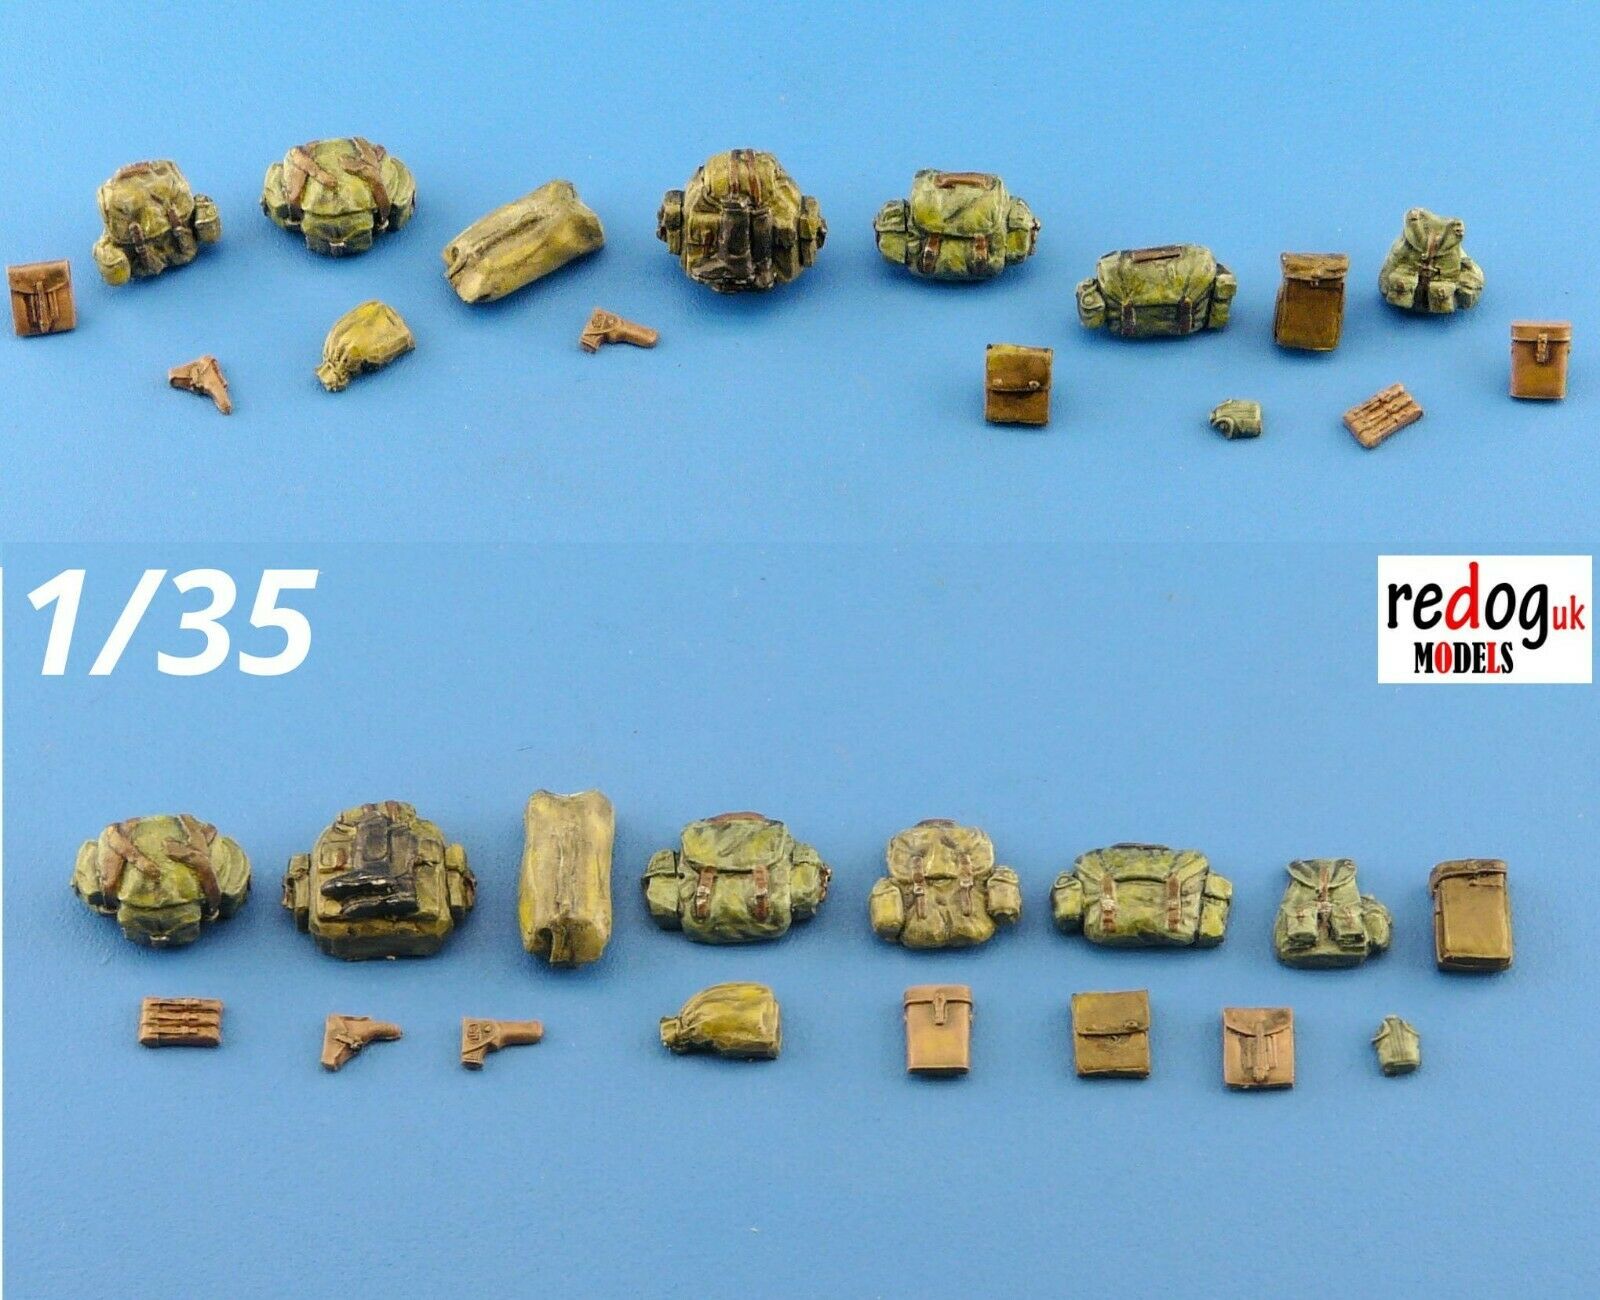 1/35 Bags and Guns Military Scale Modelling Kit Diorama Accessories Kit 14 - redoguk